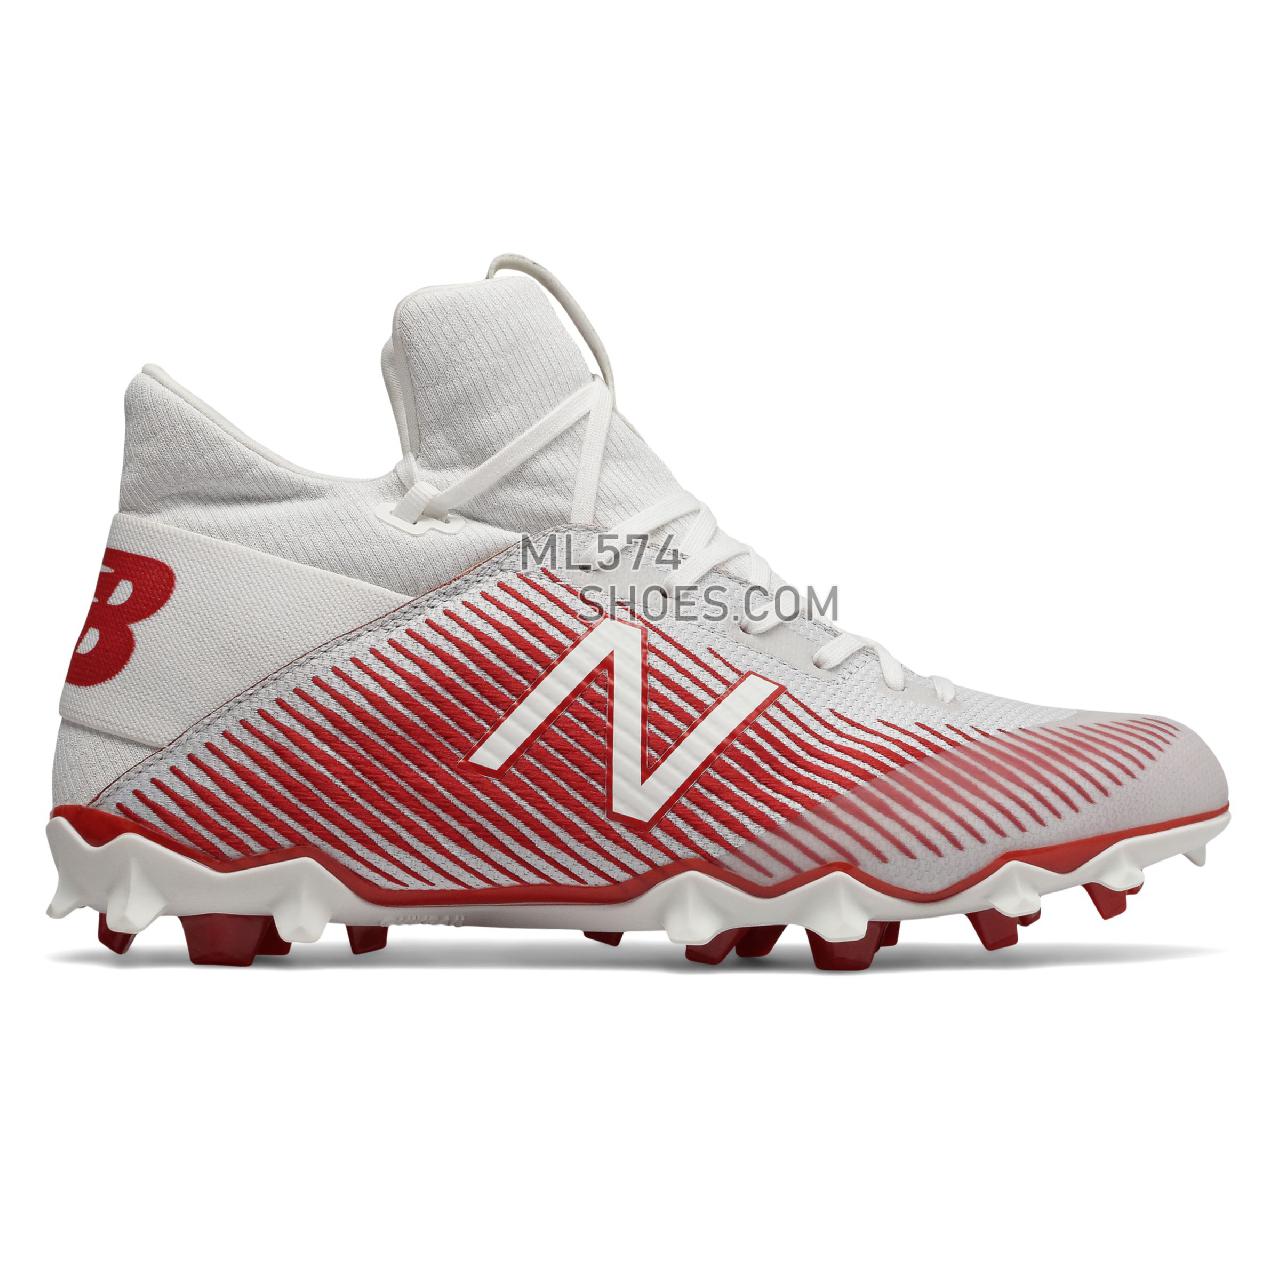 New Balance FreezeLX 2.0 - Men's 2 - Lacrosse White with Red - FREEZRD2